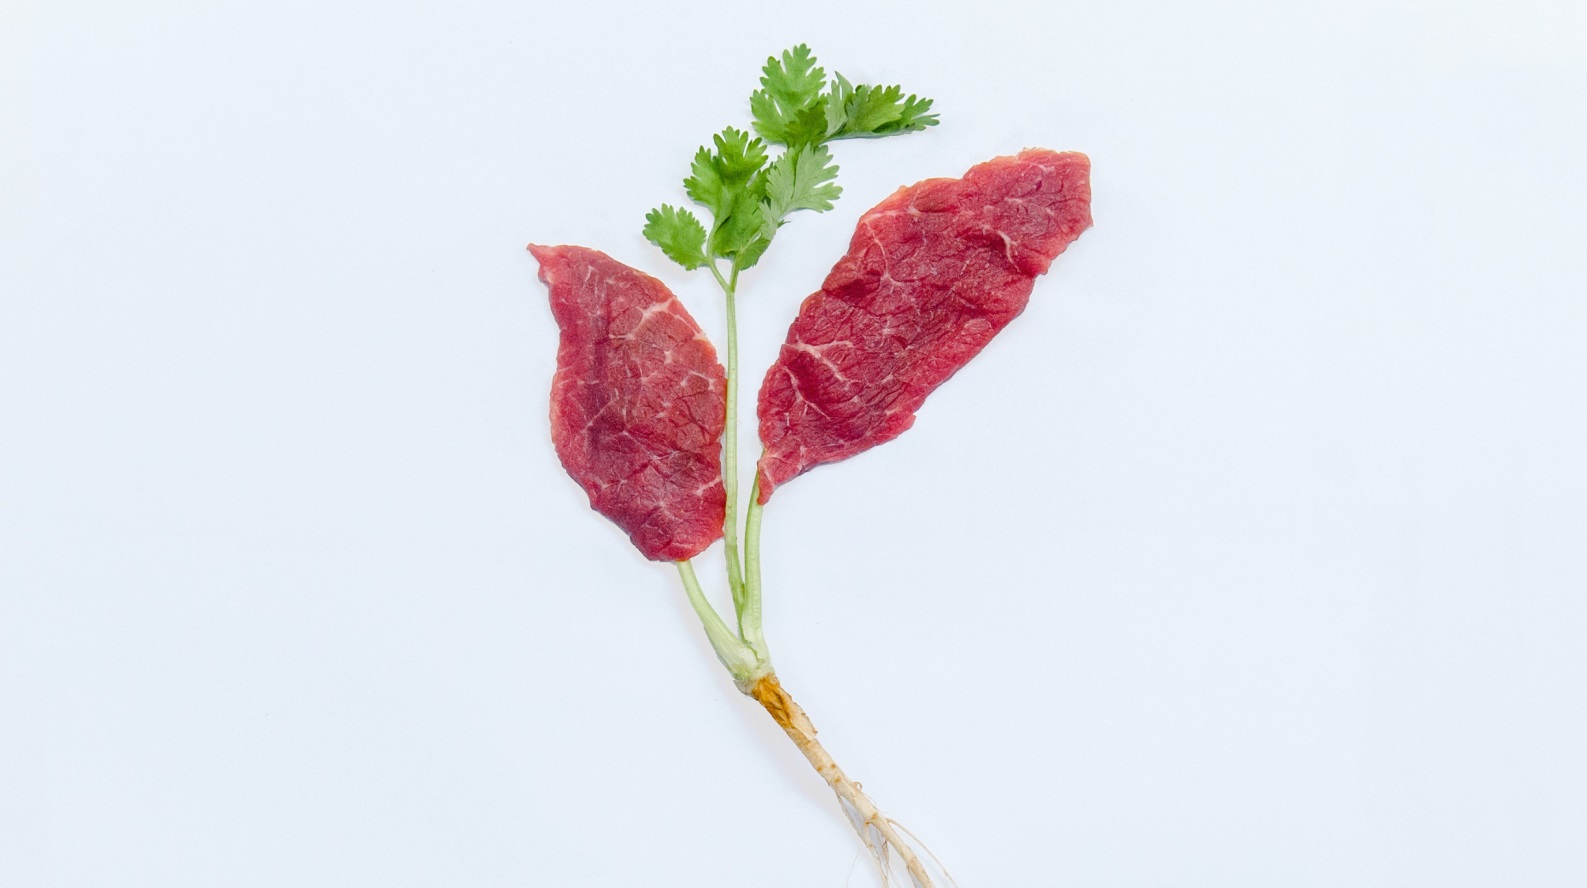 Israel is advancing production of ‘clean meat’ without raising and slaughtering animals. Photo courtesy of Aleph Farms